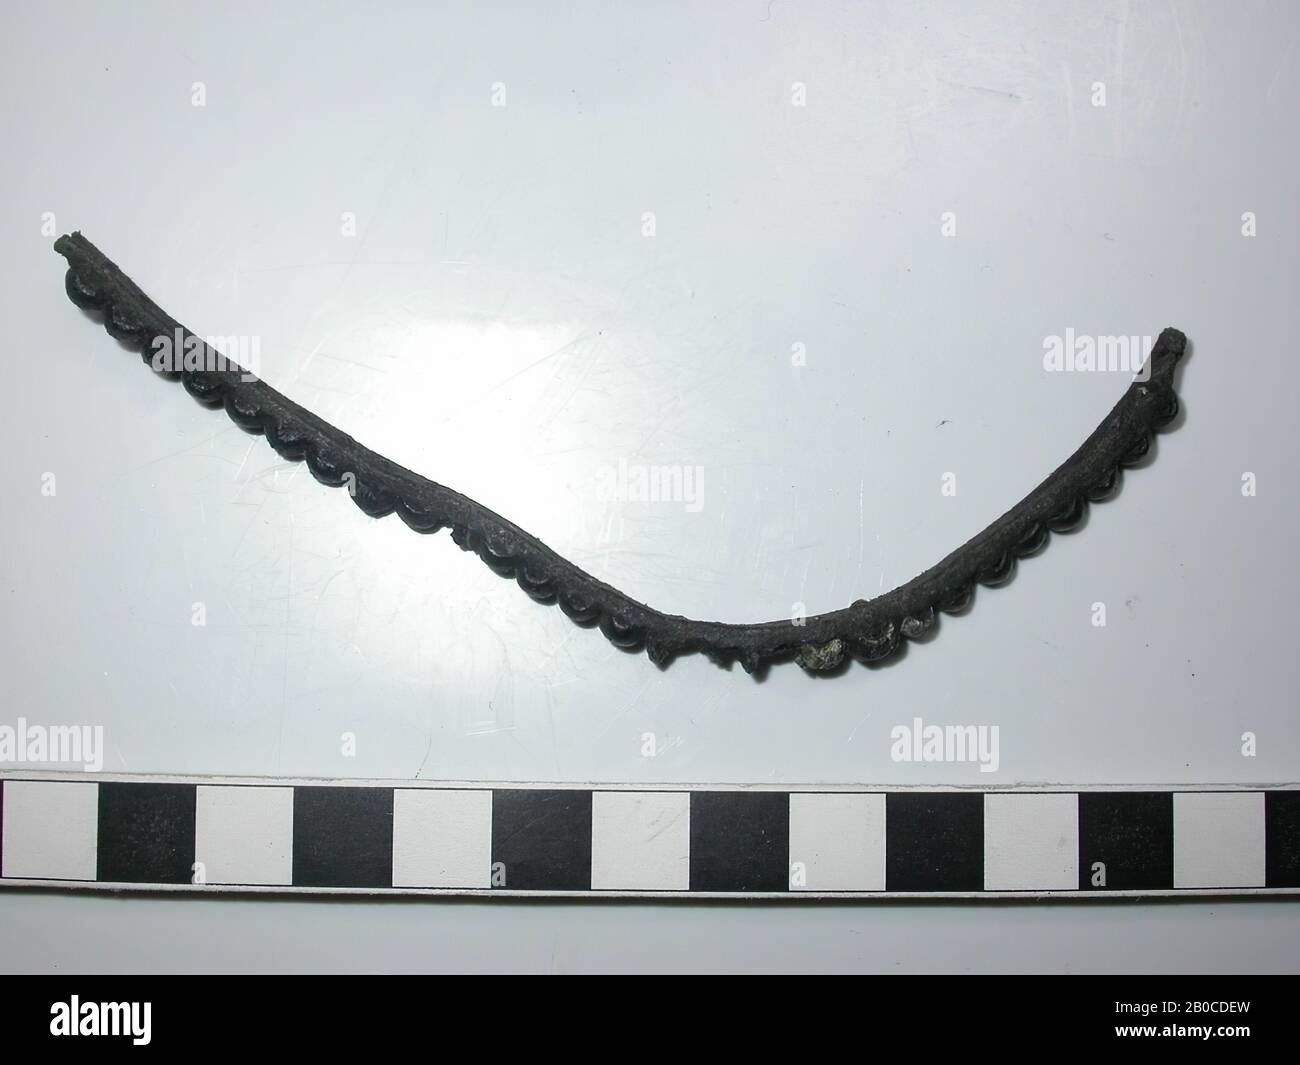 Fragment leather belt with fittings (copper alloy). On the belt are 24 decorative nails with round and round cap and 2 nails without cap. 2 nails with cap are completely missing. Three caps are incomplete. The color of the batter is dark gray to black because of the corrosion of the lead. There is no space between the caps and the fittings are as wide as the leather. The diameter of the batter is 0.45 cm and the thickness is 0.3 cm. The diameter of the nails is 0.1 cm., Belt with fittings, organic, leather, metal, copper alloy and lead, Belt: L: 13.7 cm, W: 0.45 cm, D: 0.25 cm, end 14th Stock Photo